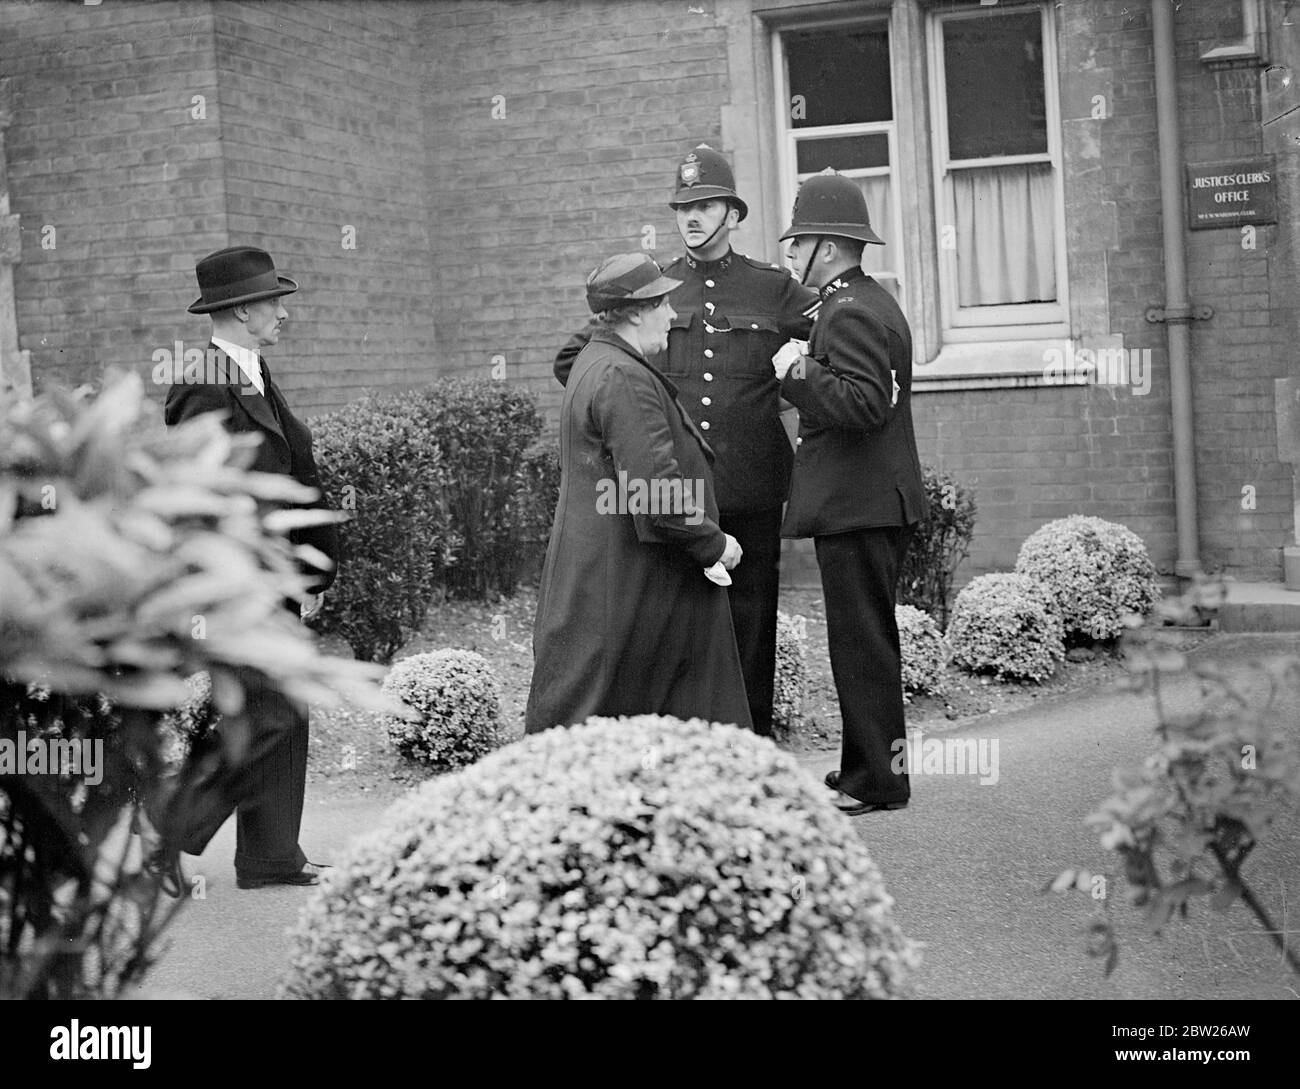 Brain appears on remand at Wimbledon dead woman's husband at court.. George Brain appeared on remand at Wimbledon. Police Court charged with the murder of Mrs Rose Muriel Atkins, whose body was found beside a Wimbledon Road. Photo shows, the husband George Robert Atkins of the dead woman arriving at the court with his mother. 2 August 1938 Stock Photo